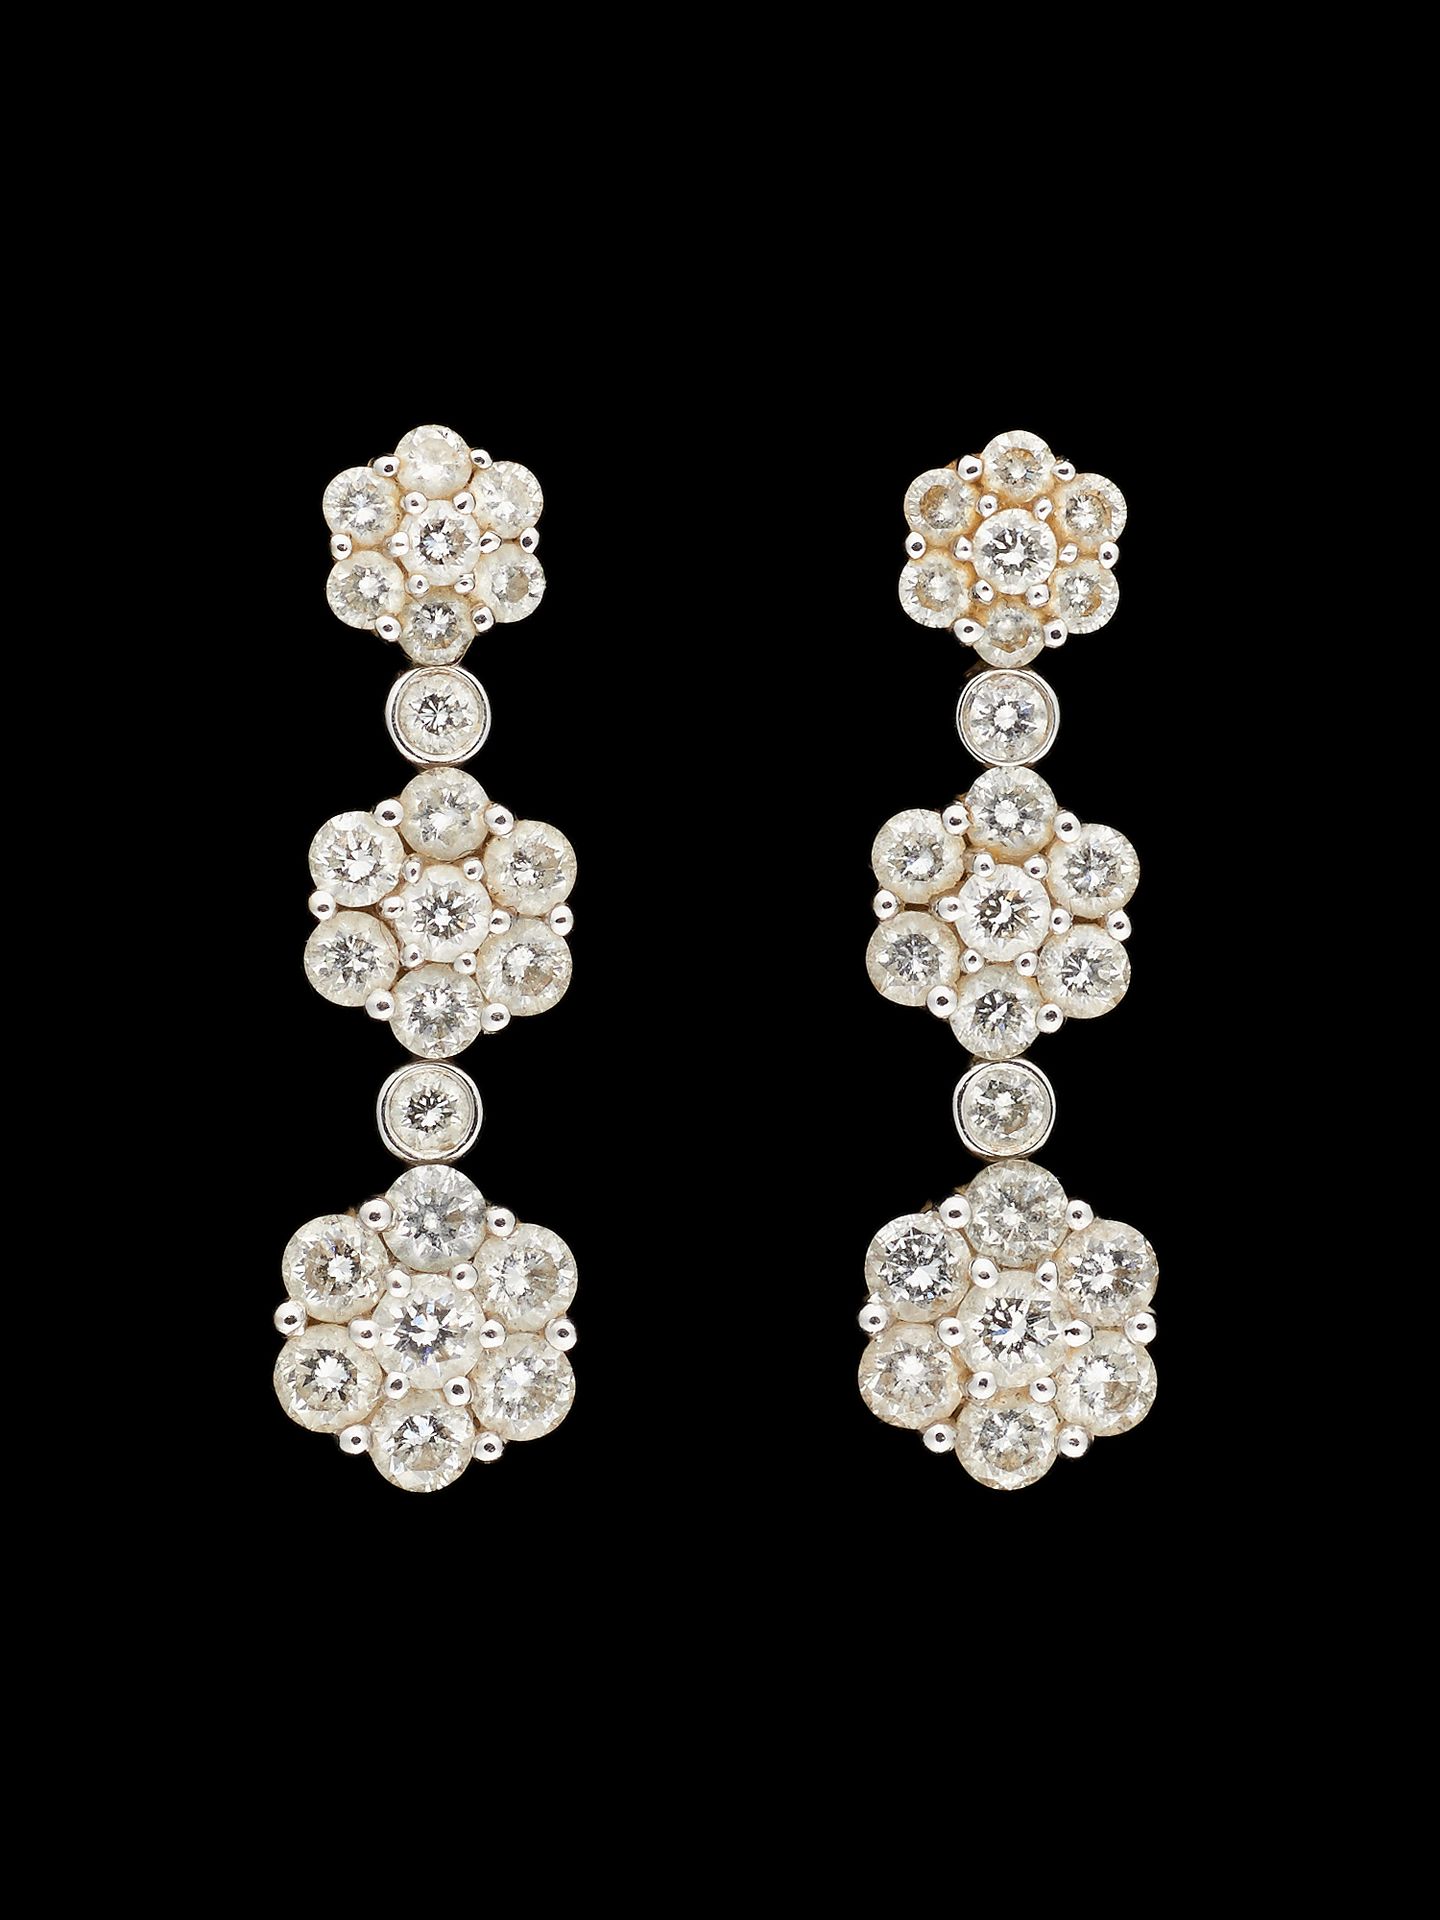 Joaillerie. Jewelry: Pair of earrings in white gold with brilliant cut diamonds &hellip;